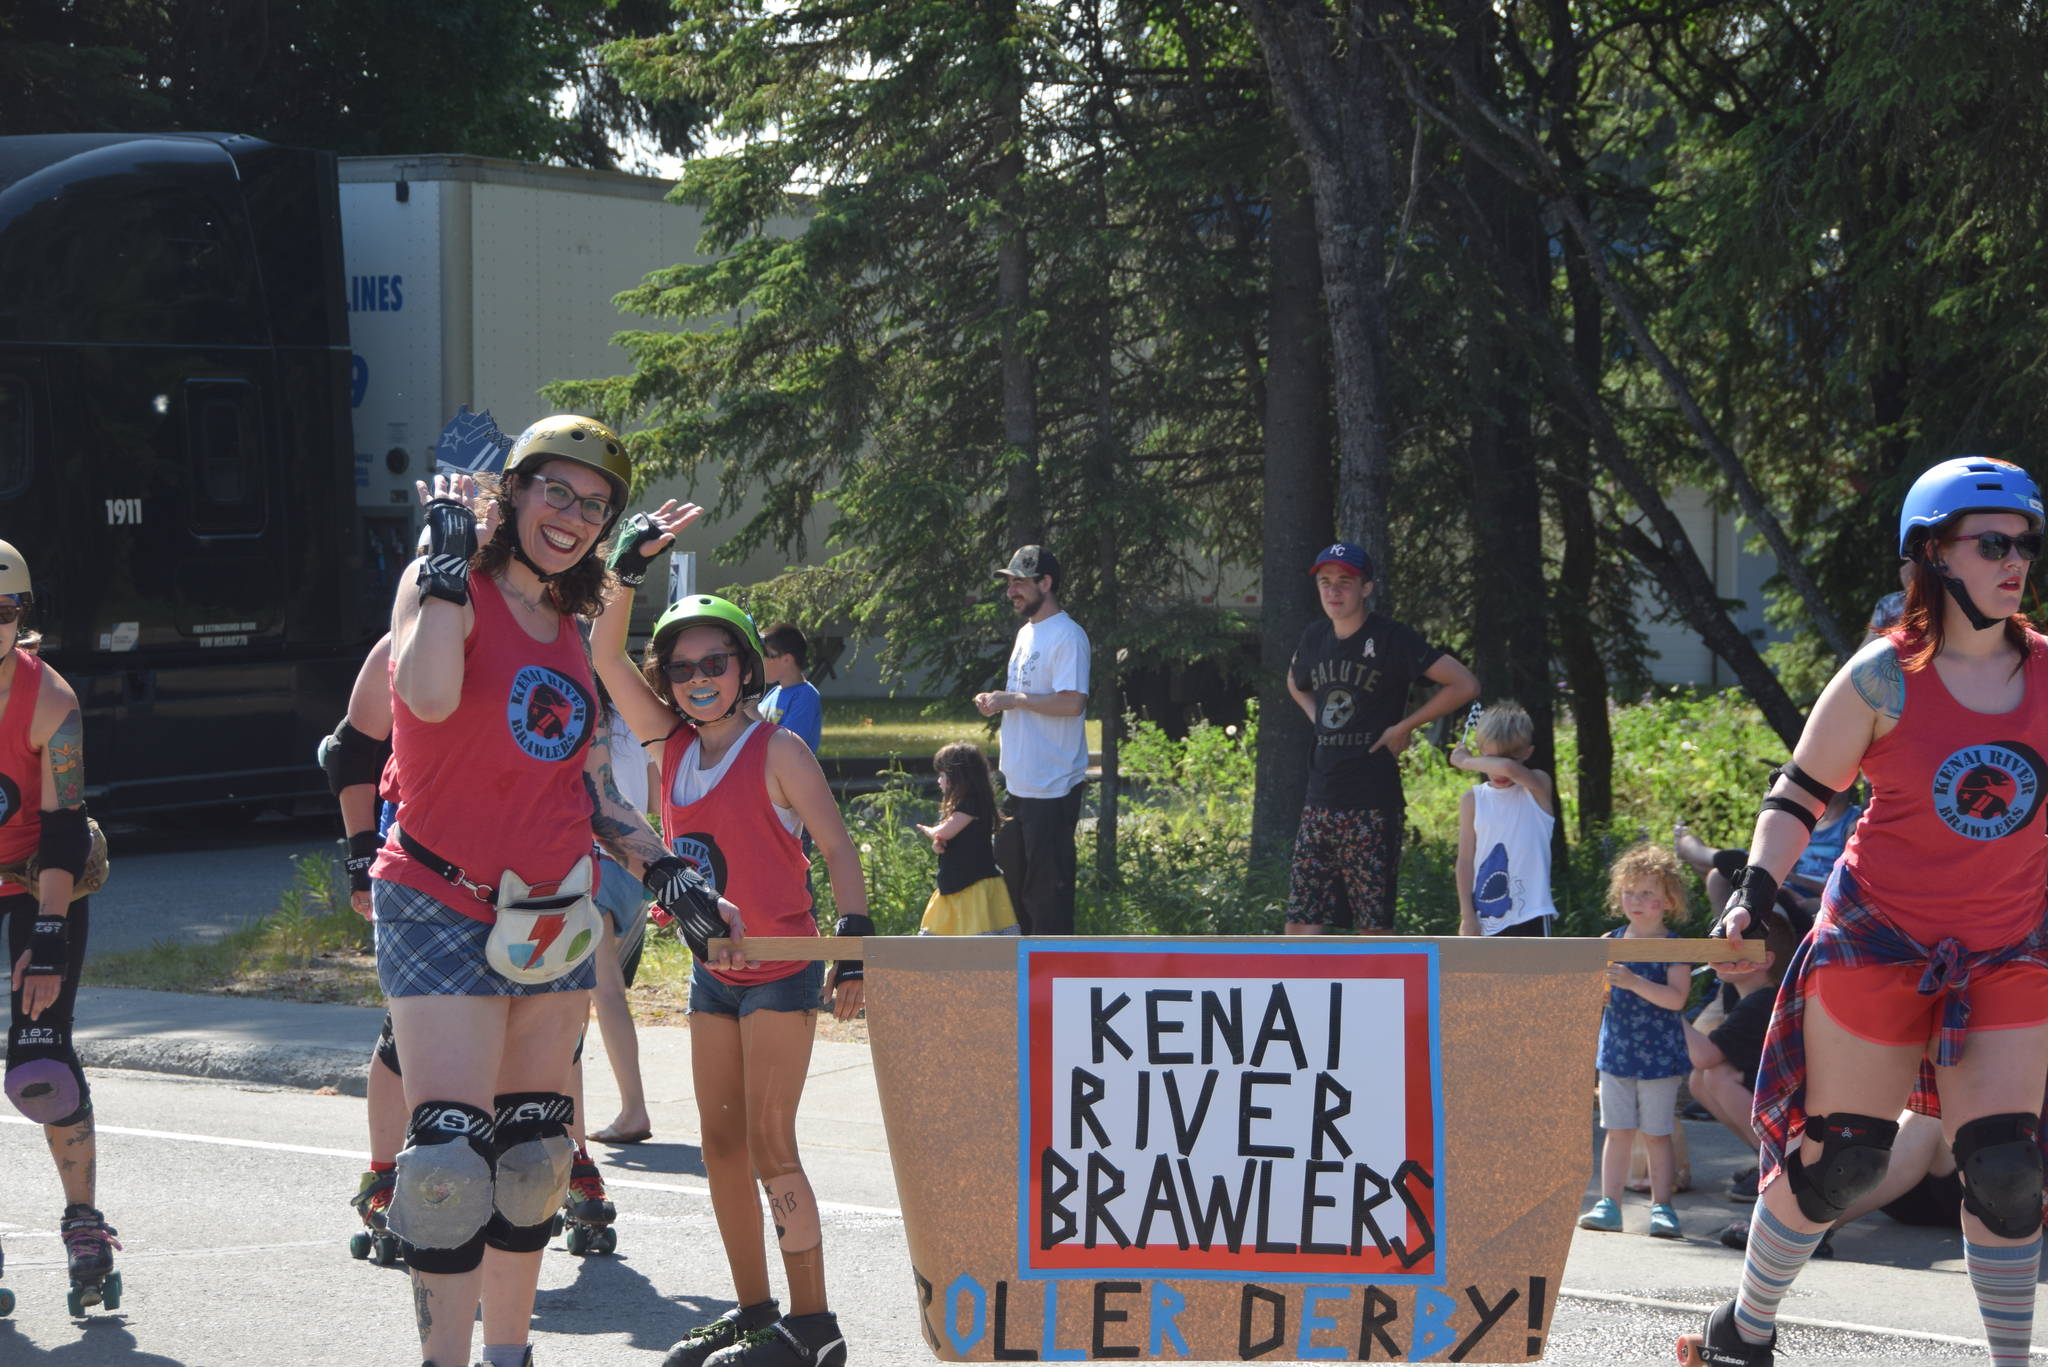 Members of the Kenai River Brawlers roller derby team wave to the crowd during the July 4th parade in Kenai, Alaska. (Photo by Brian Mazurek/Peninsula Clarion)